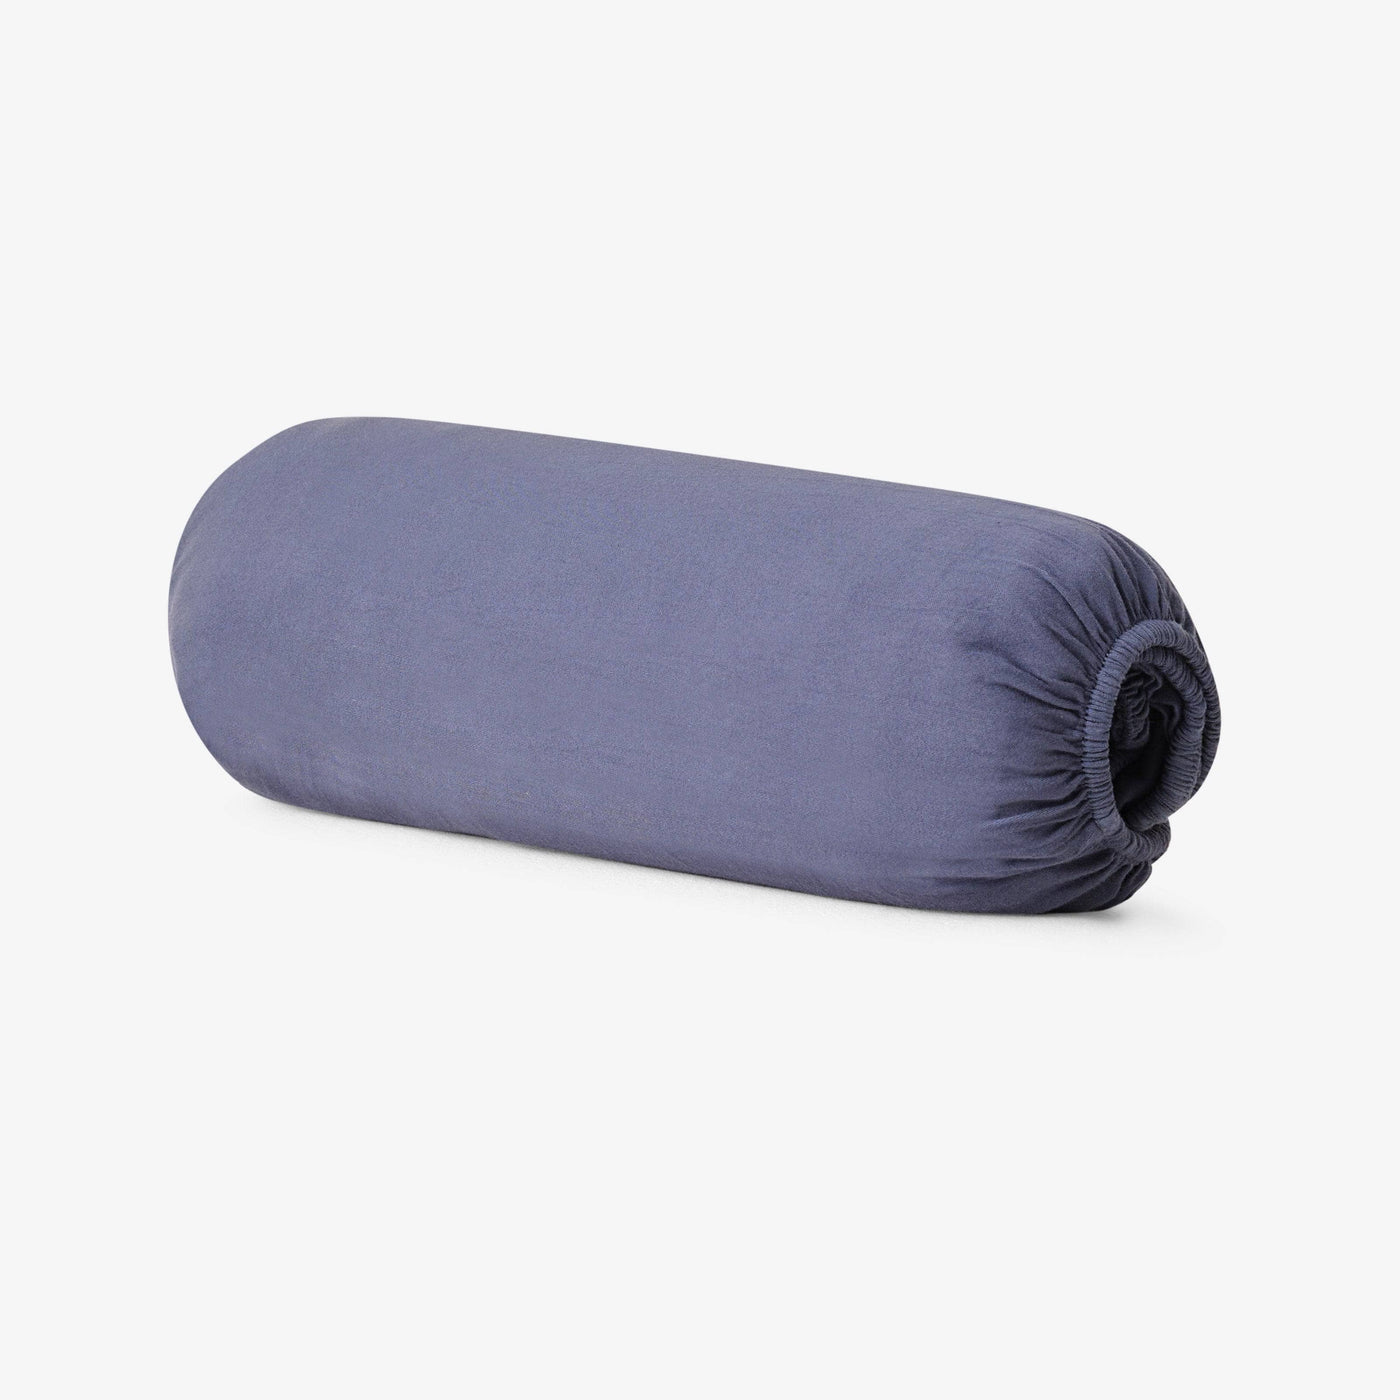 Freddie 100% Turkish Cotton 300 TC Fitted Sheet, Navy, King Size Bed Sheets sazy.com